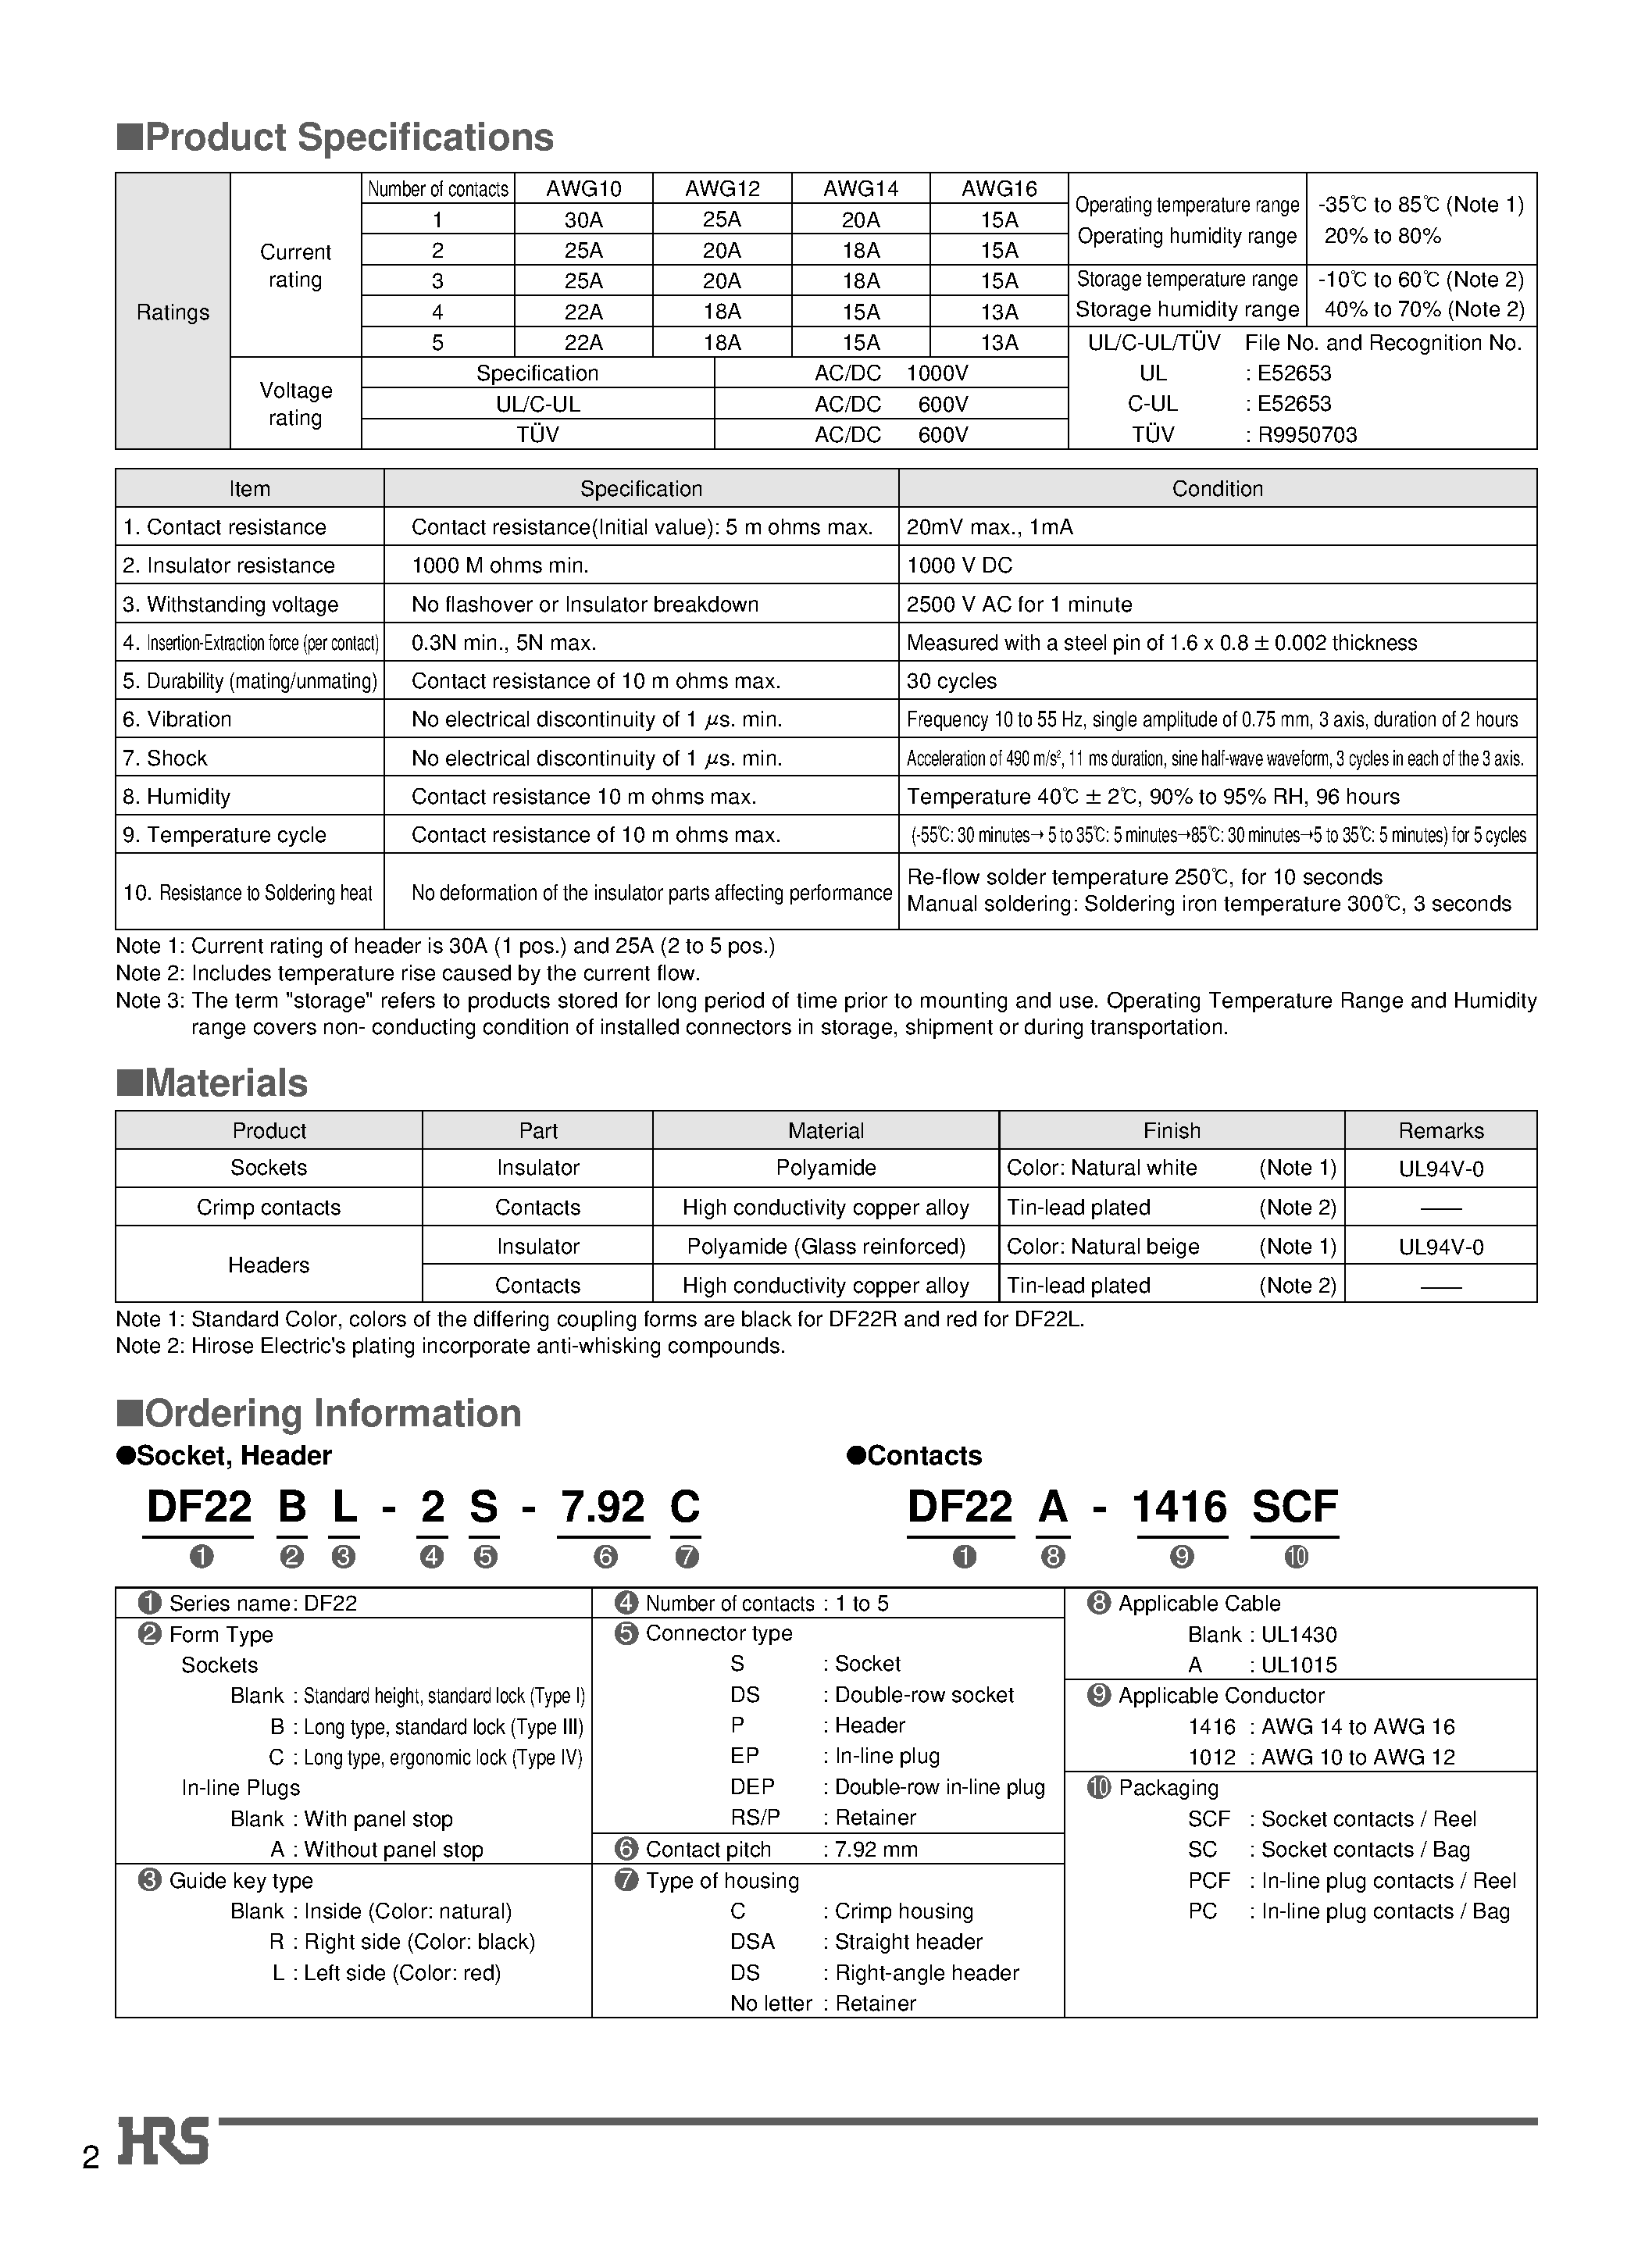 Datasheet DF22-3RS/P-7.92 - 7.92 mm Contact Pitch/ High-Current Connectors for Internal Power Supplies (UL/ C-UL and TUV Listed) page 2